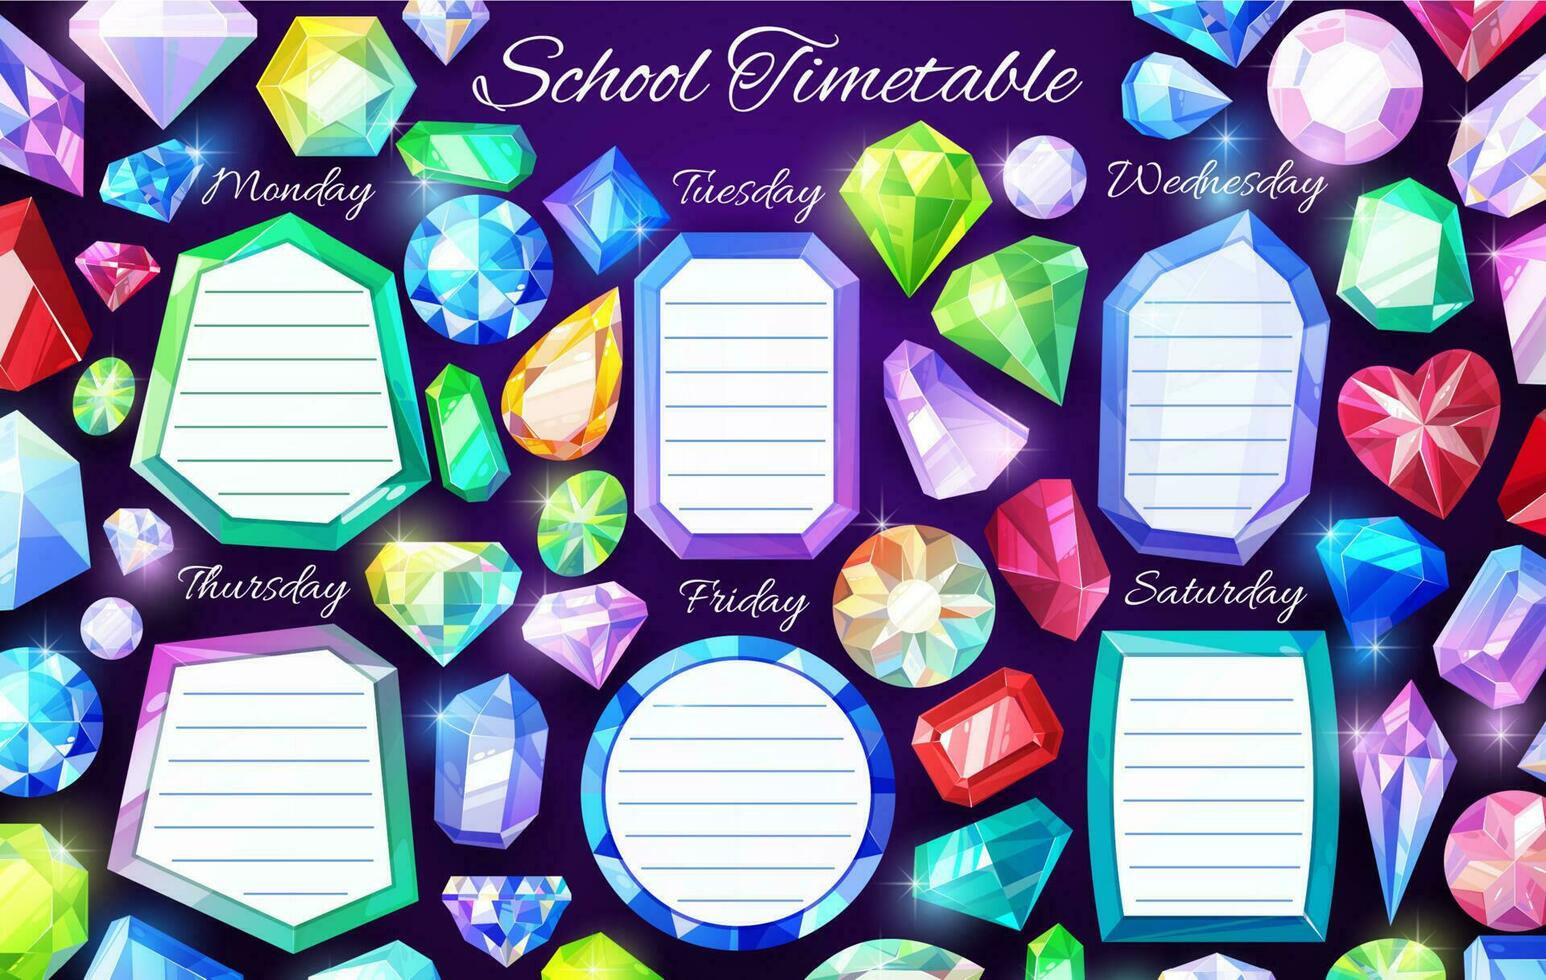 School timetable with gems and crystals vector